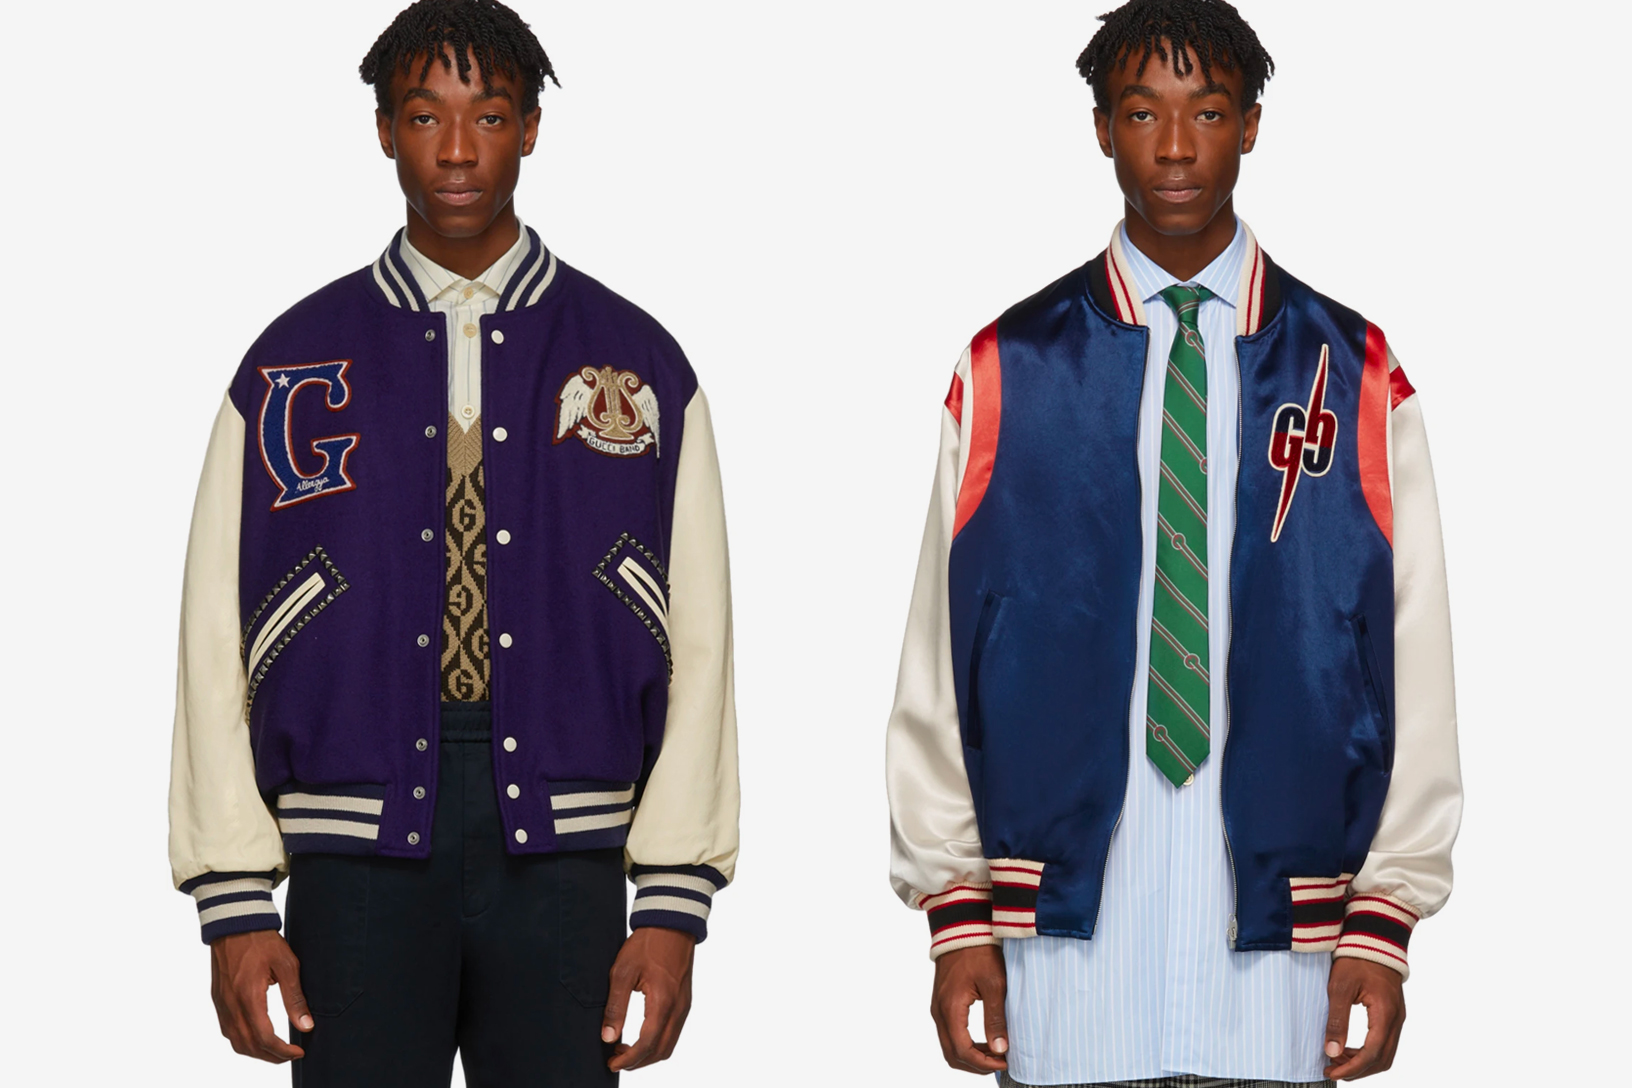 broadwalk  Gucci outfits, Gucci outfit, Varsity jacket